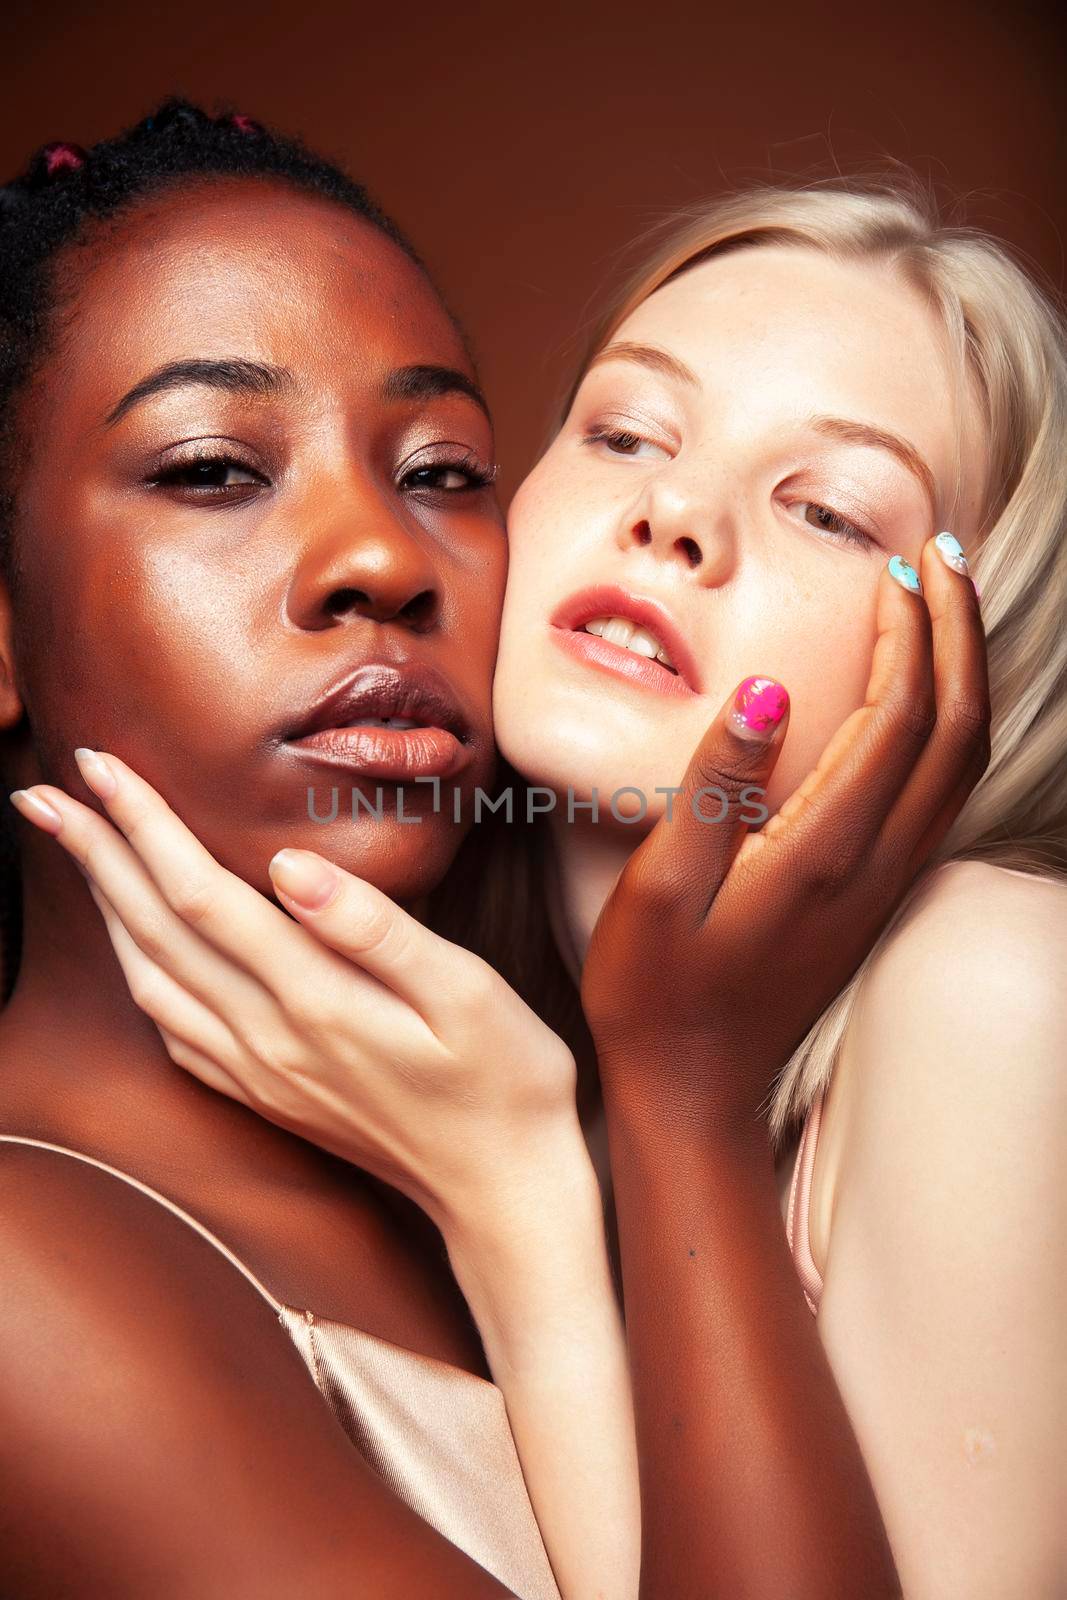 two pretty girls african and caucasian blond posing cheerful together on brown background, ethnicity diverse lifestyle people concept by JordanJ